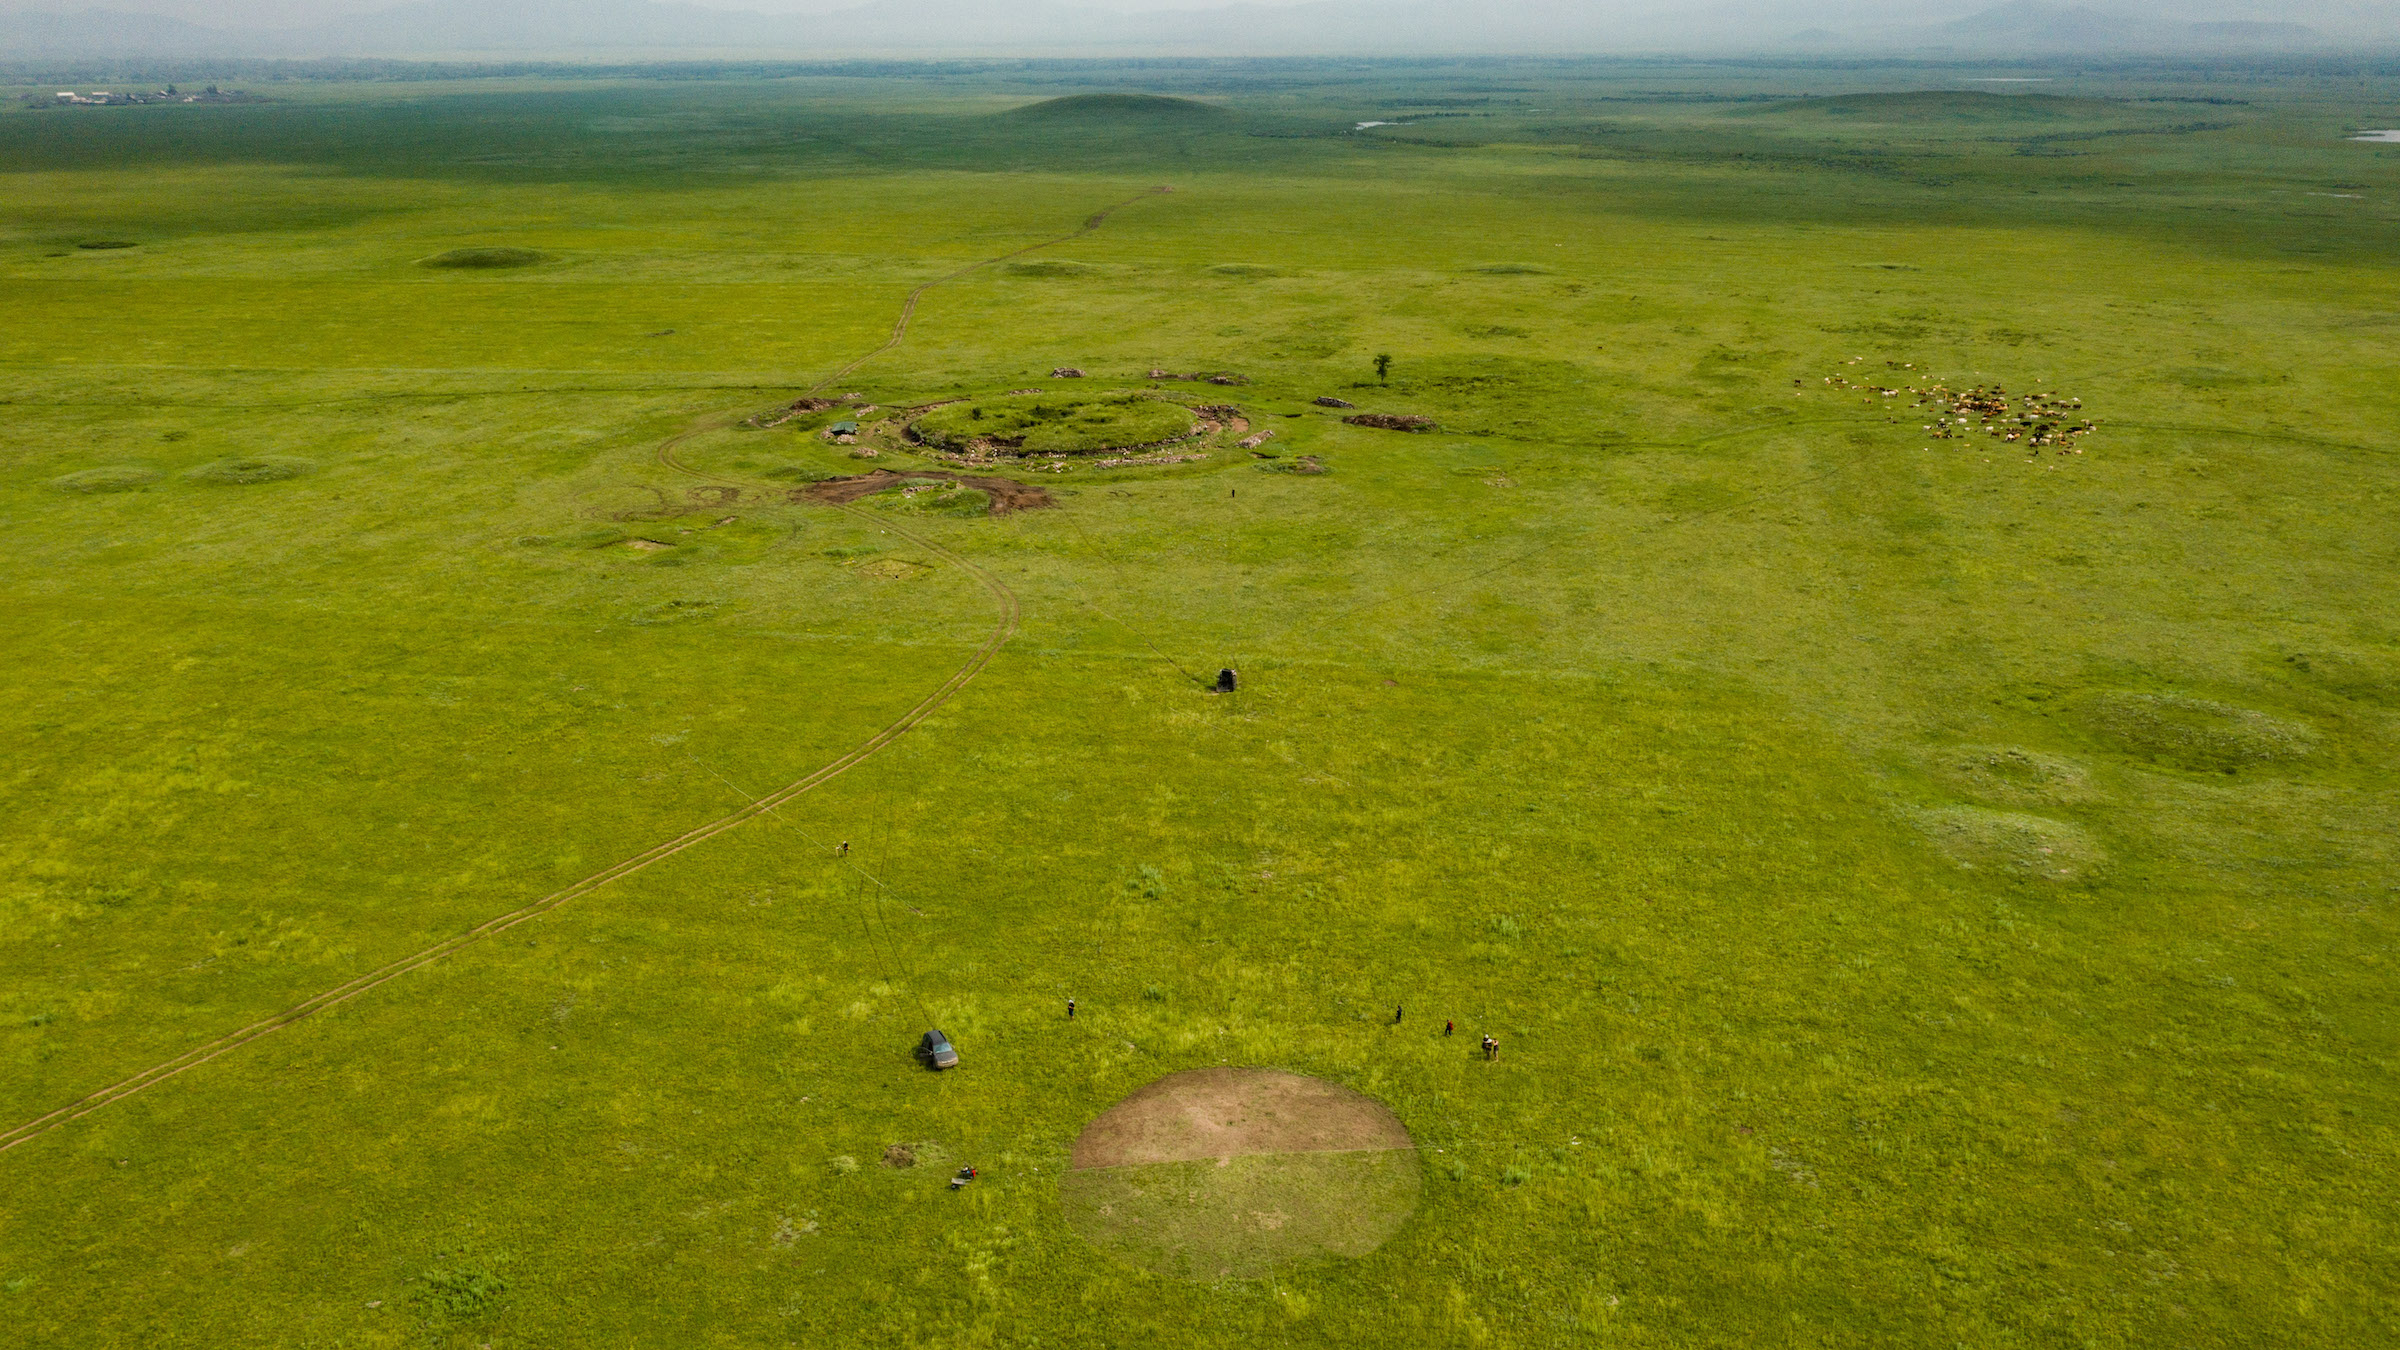 The kurgan held the remains of five ancient people belonging to the Scythian culture.